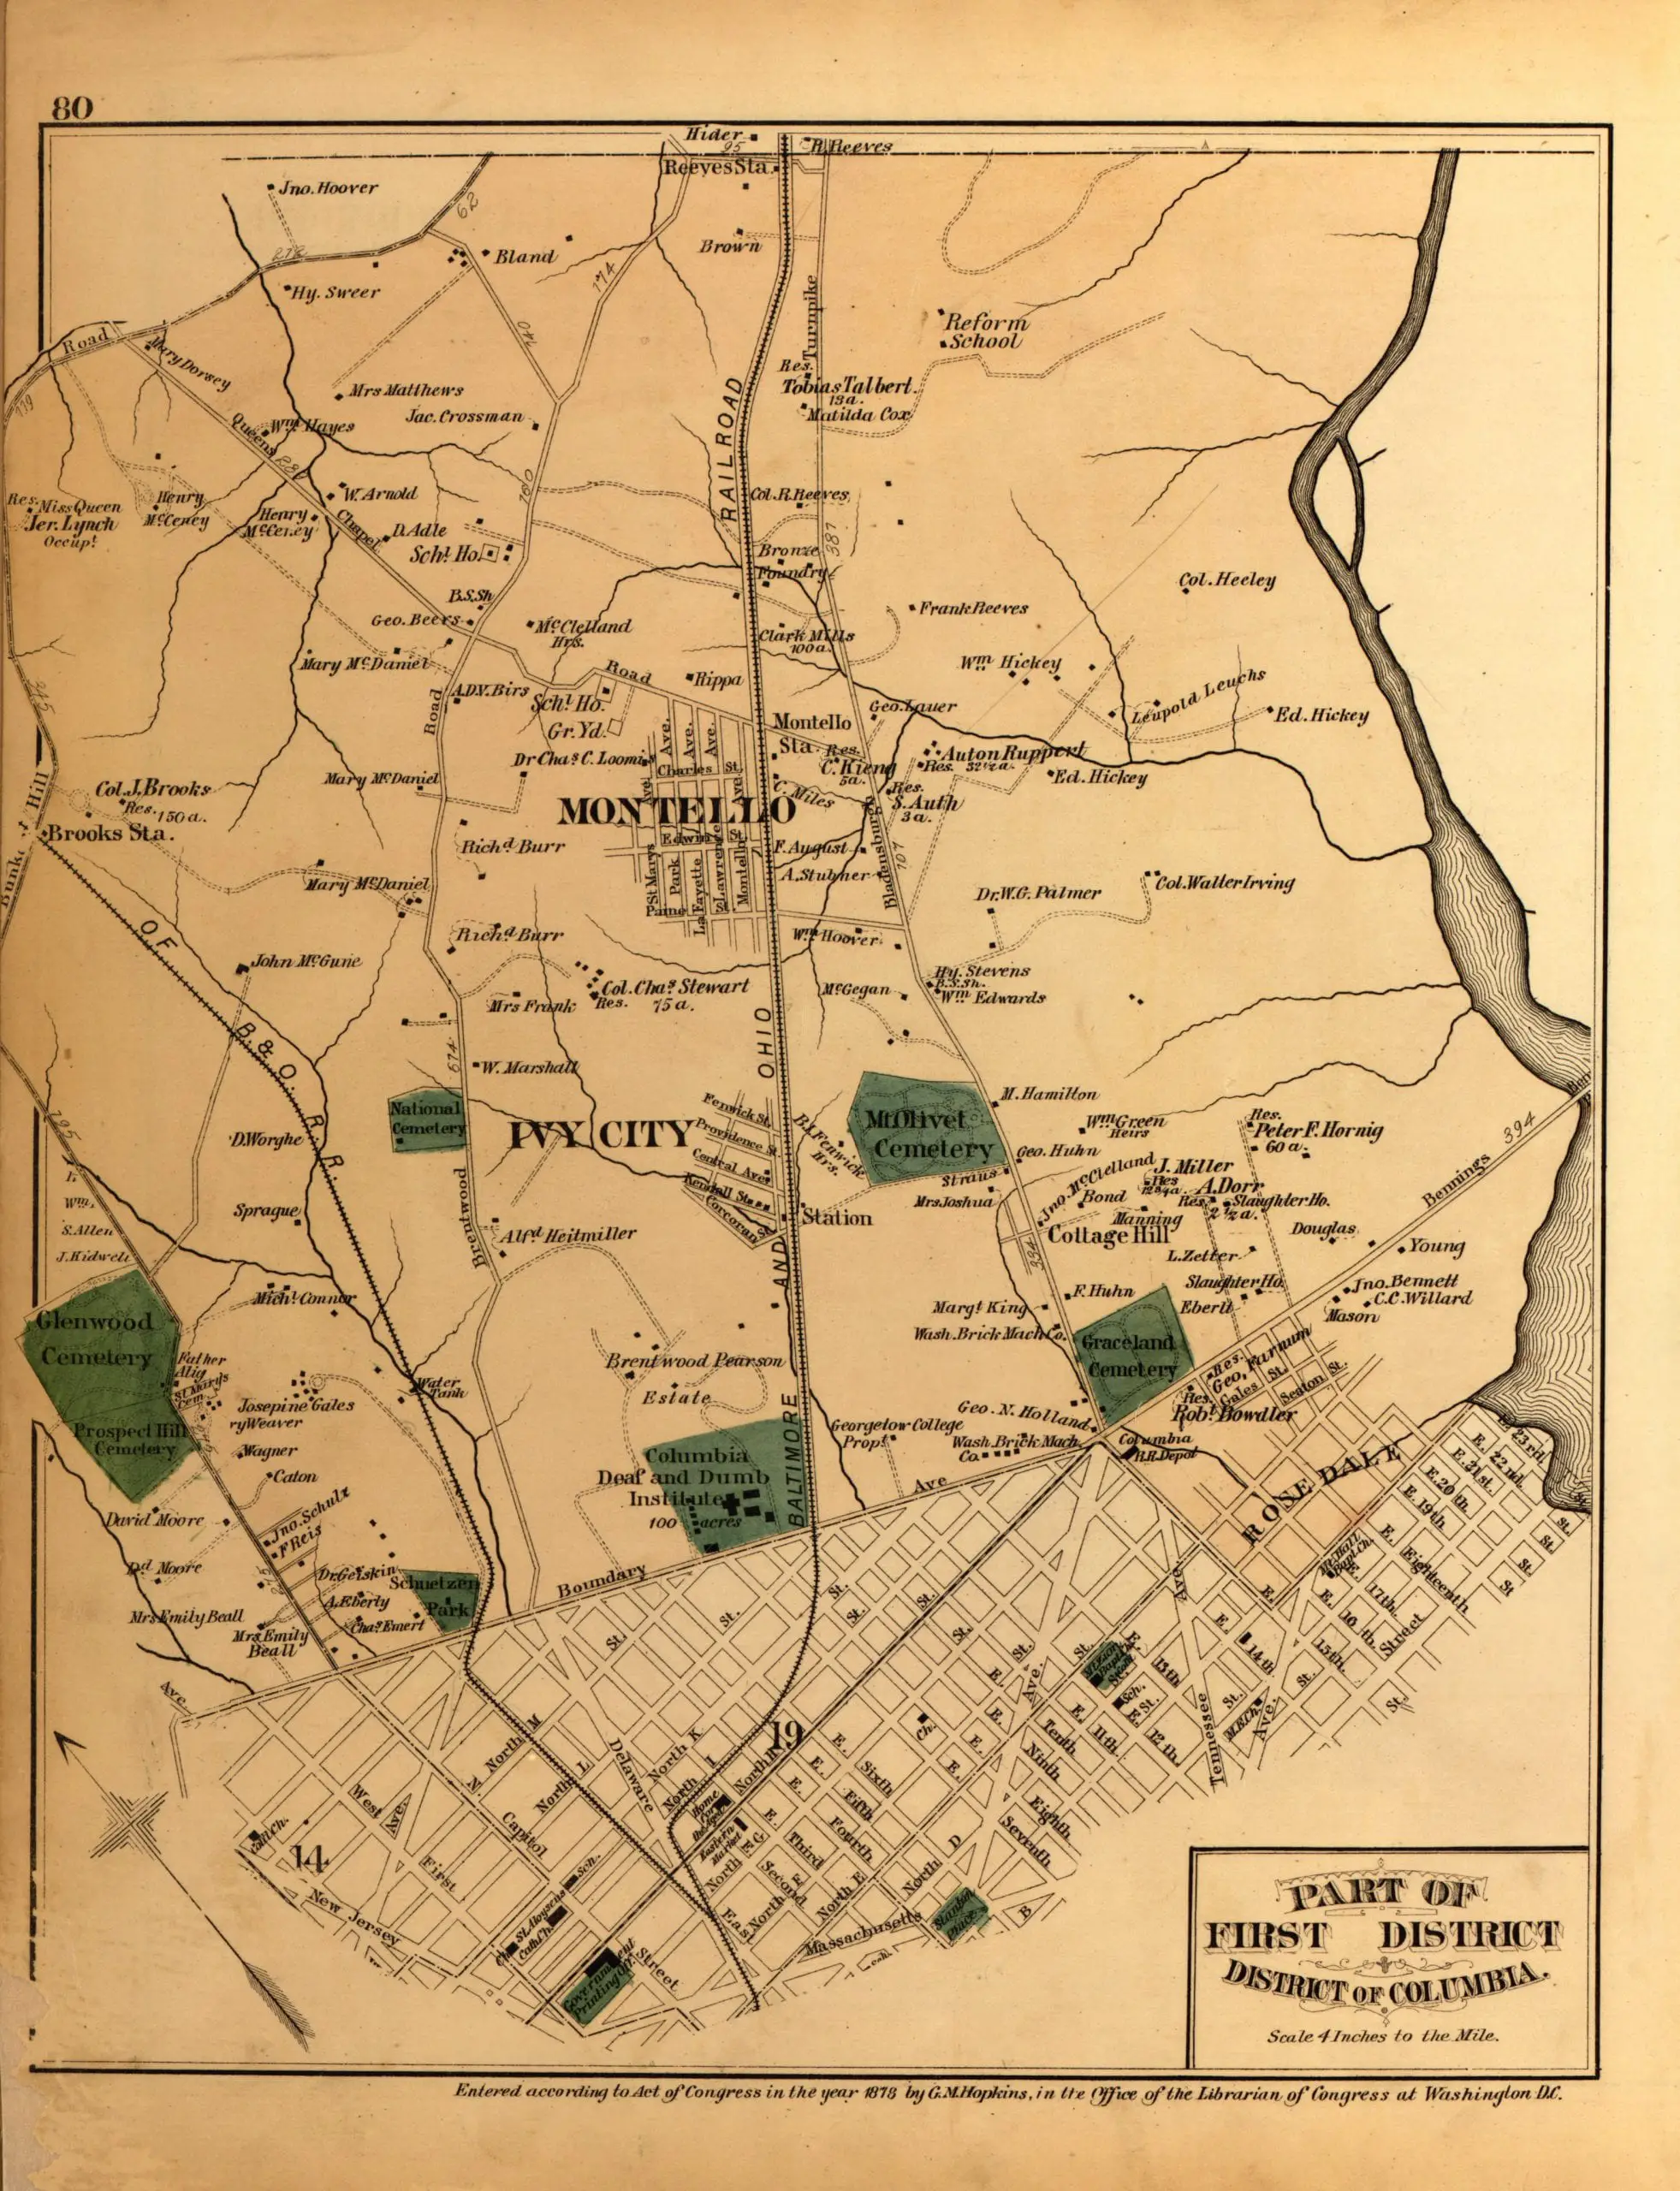 part of first district - District of Columbia (1879)